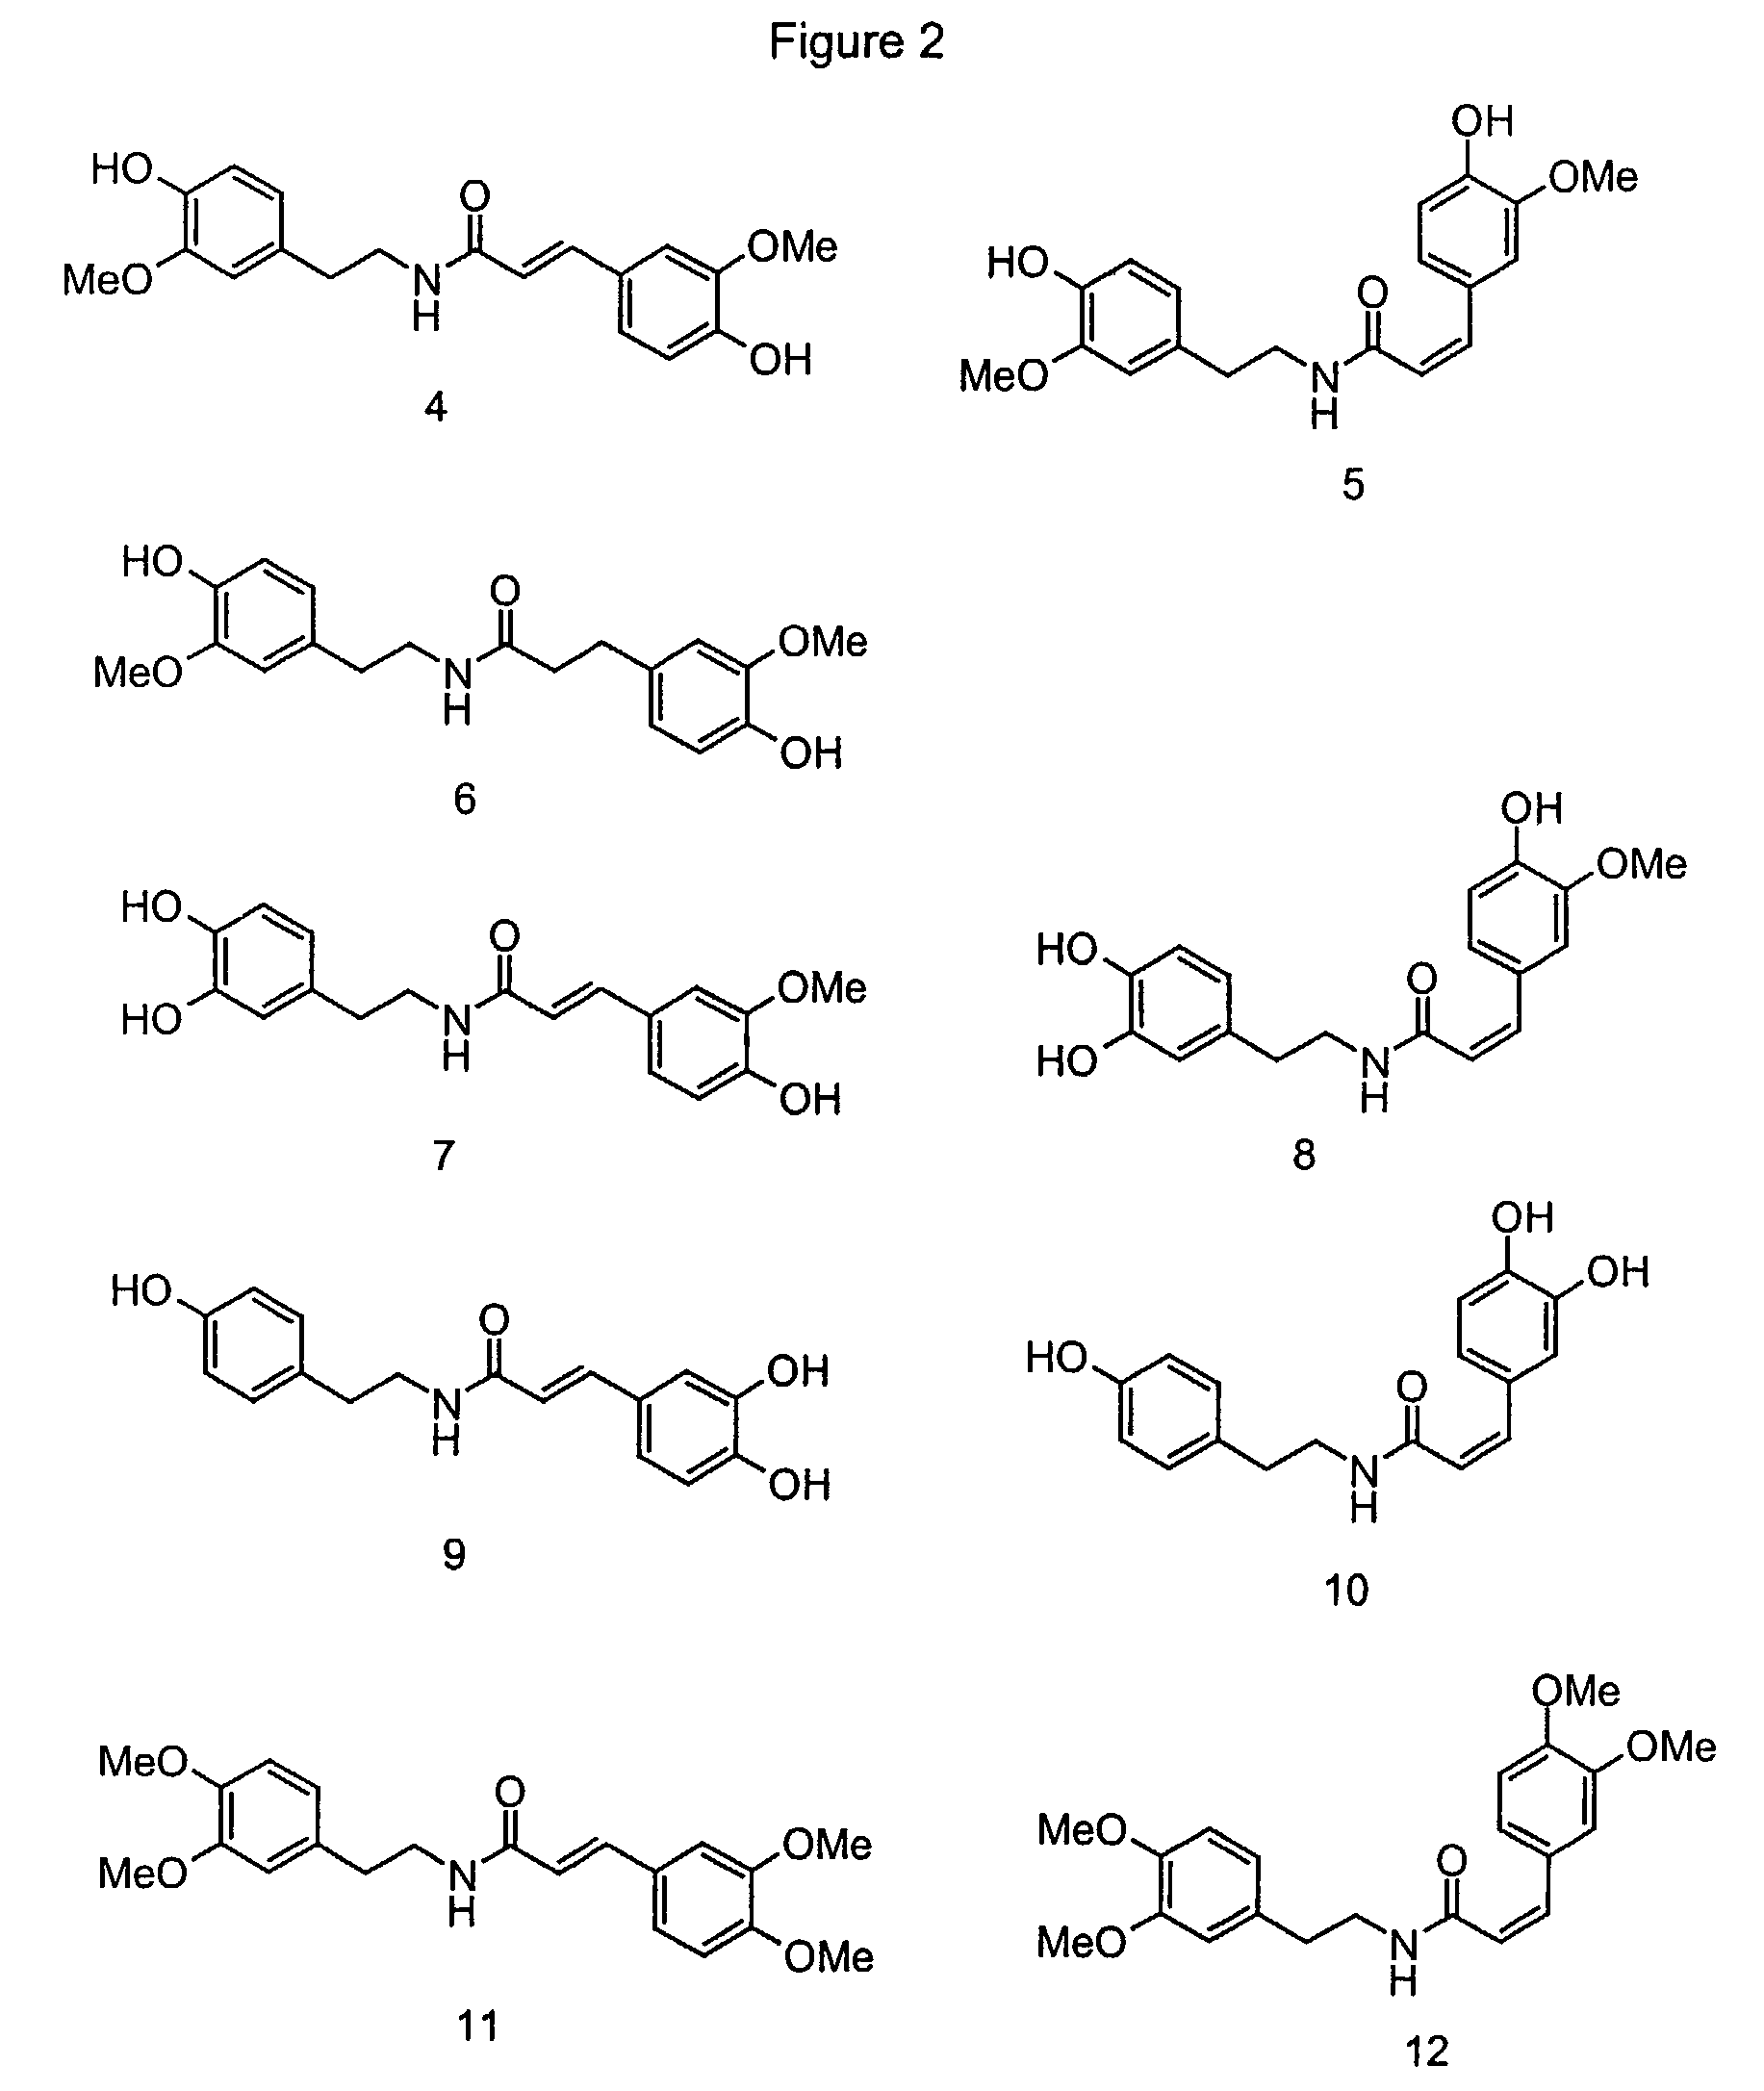 Use of ferulic acid amides as flavor compounds